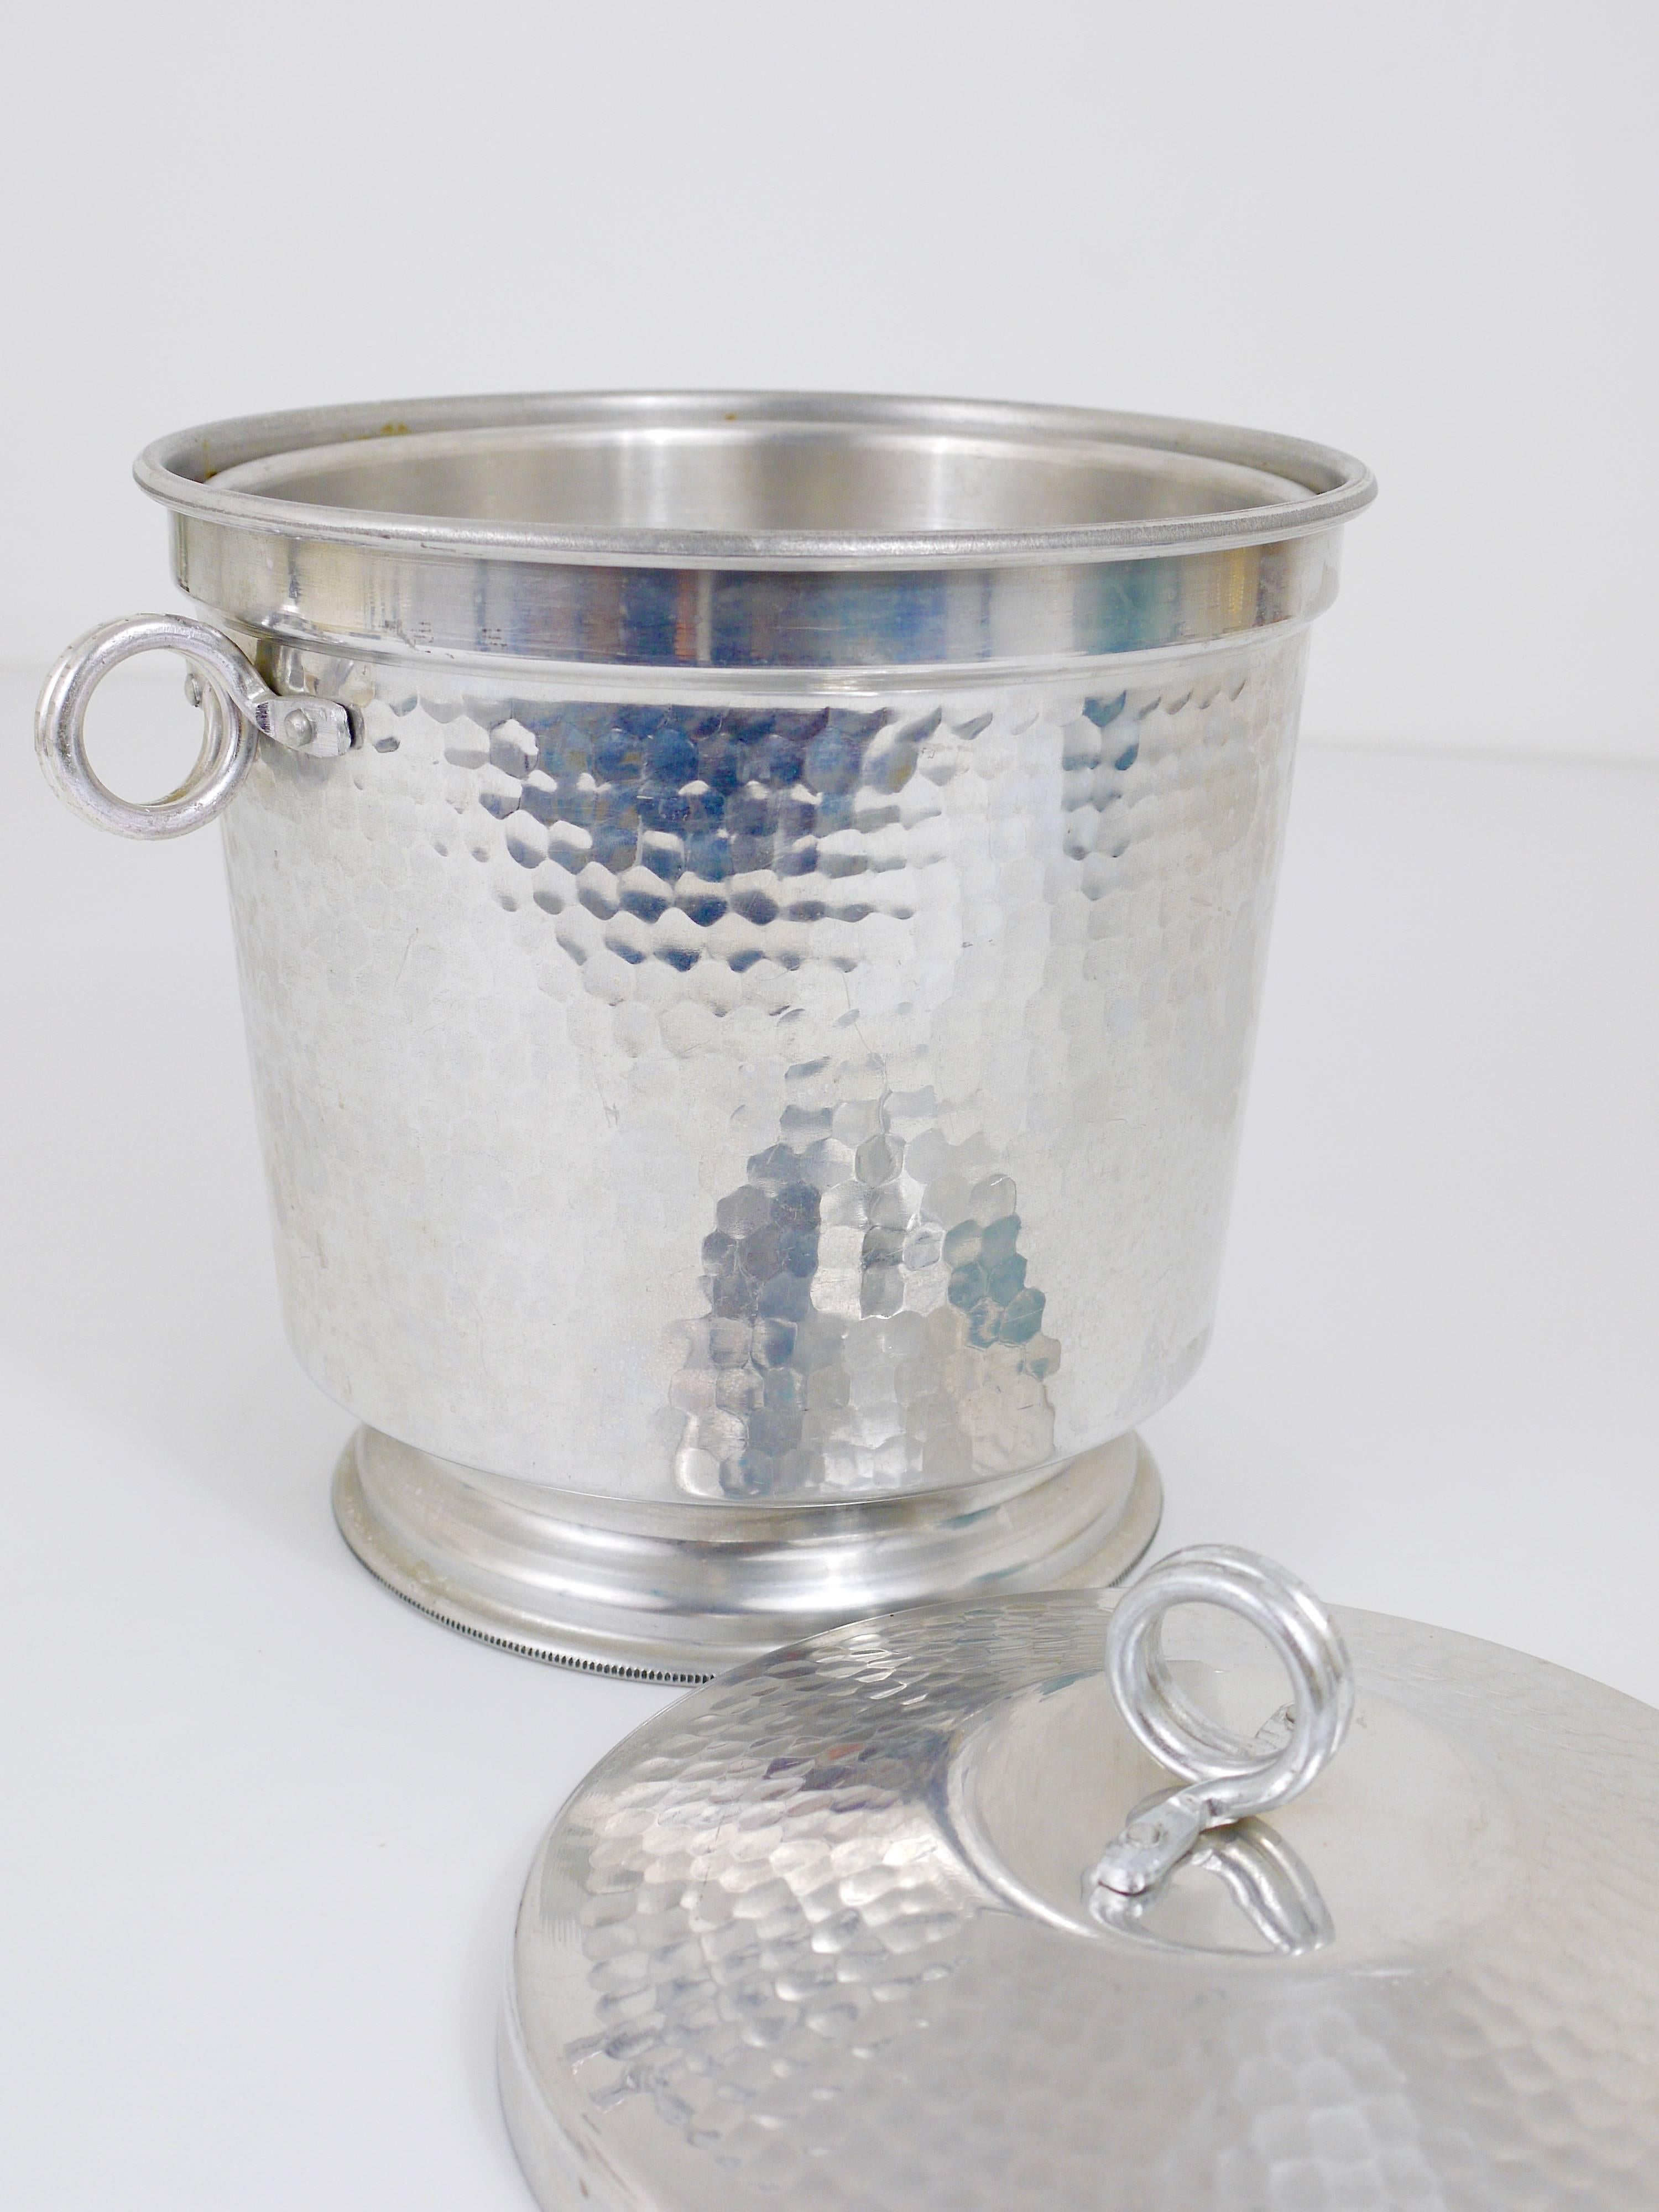 A beautiful handmade, hammer-blown ice bucket from the 1950s. Made of aluminium in very good condition with nice patina. Made in Italy, marked on its underneath.